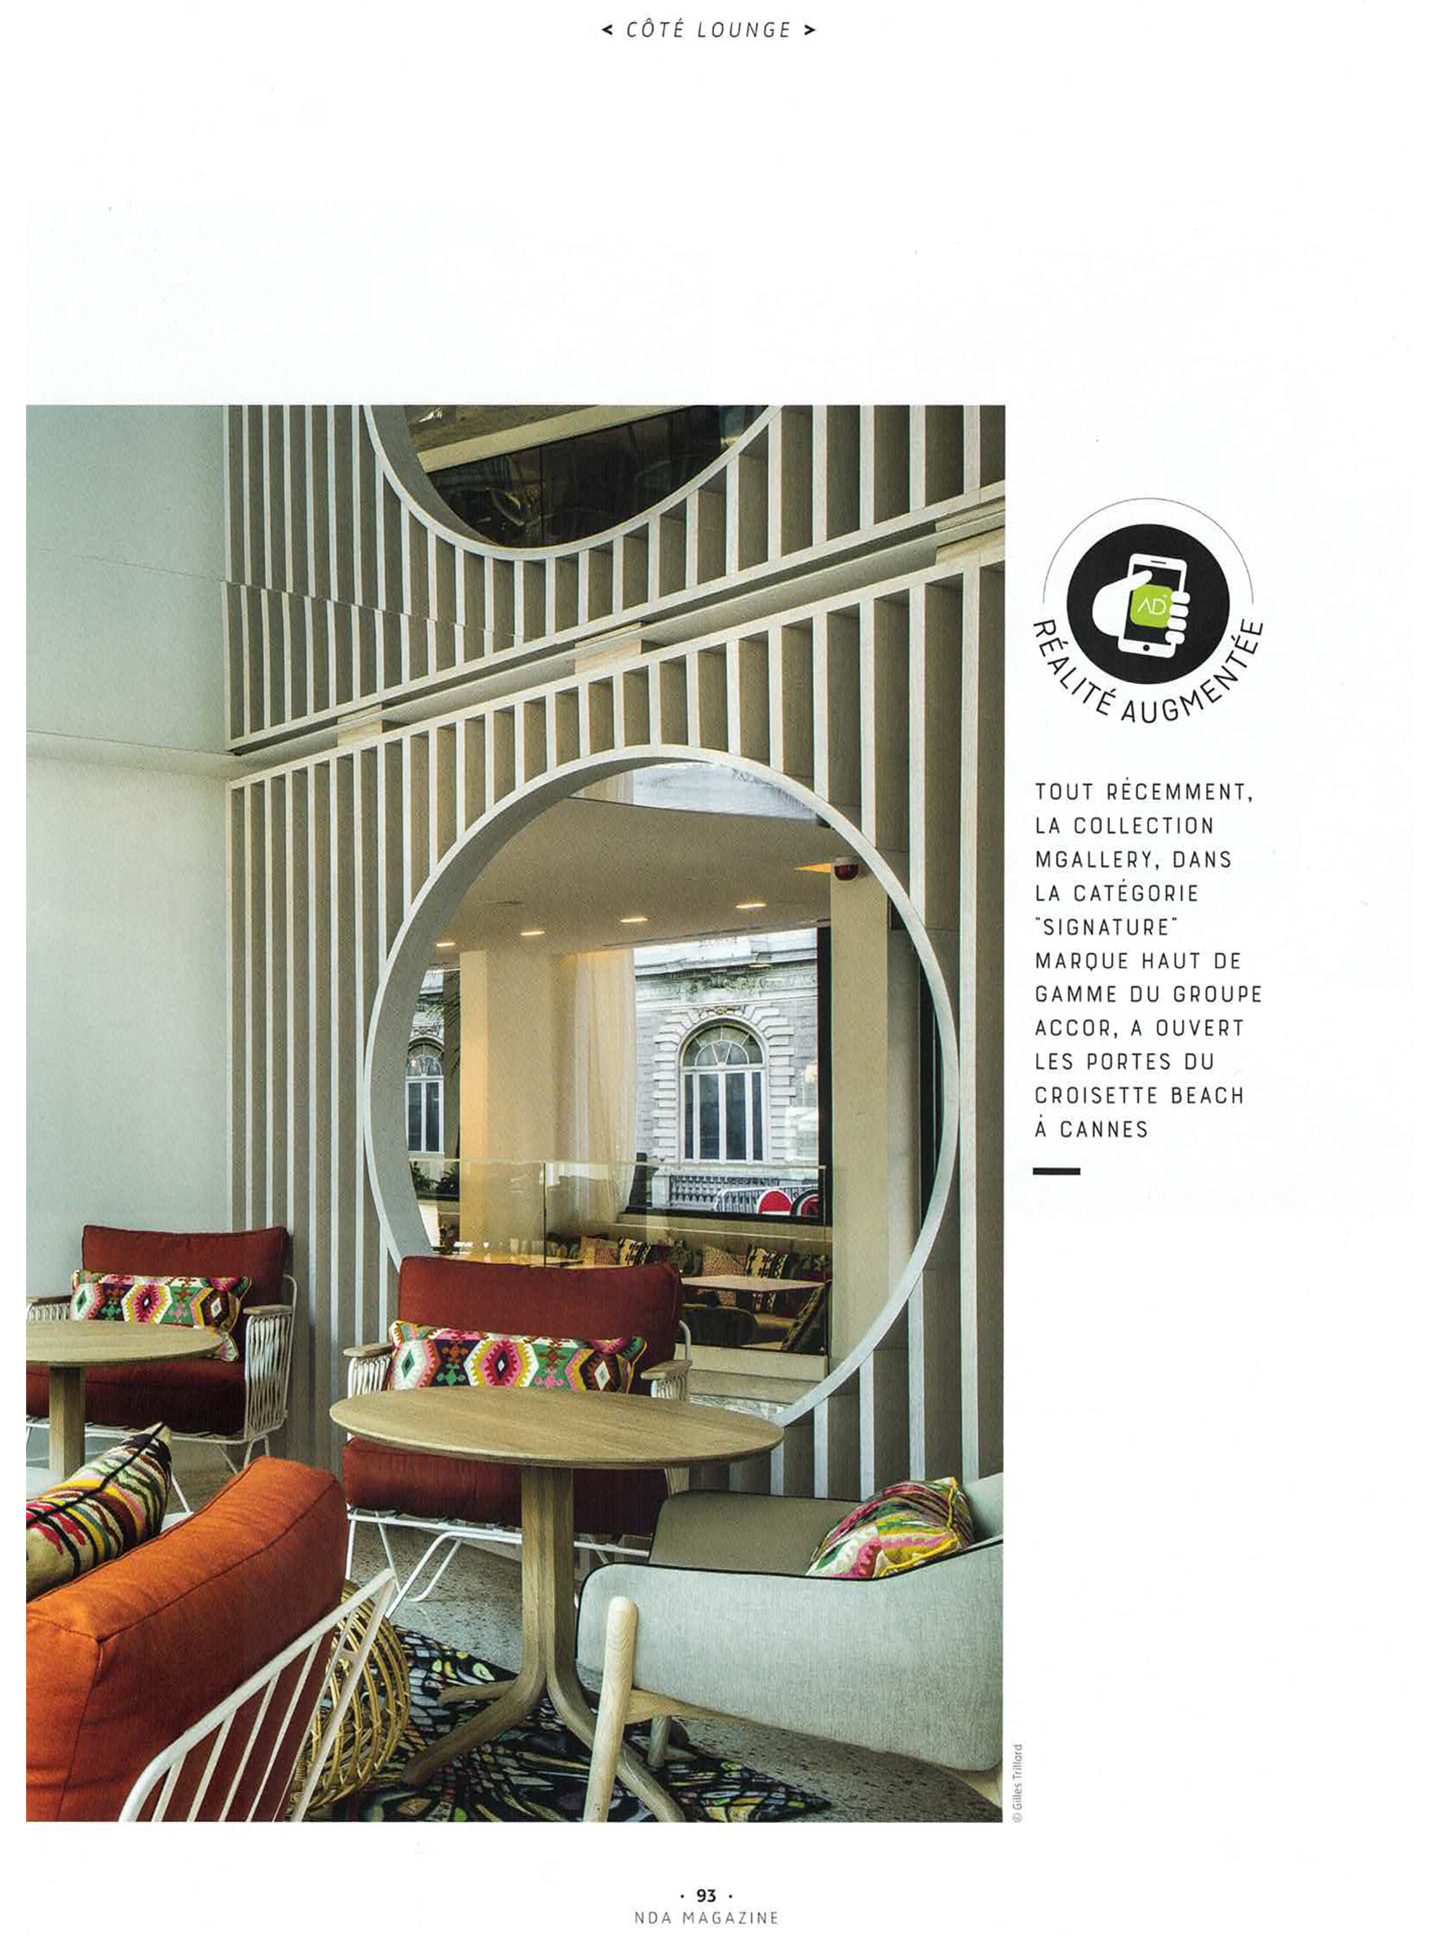 Article on the croisette beach cannes realized by the studio jean-Philippe Nuel in the magazine nda, new lifestyle hotel, luxury interior design, cannes, french riviera